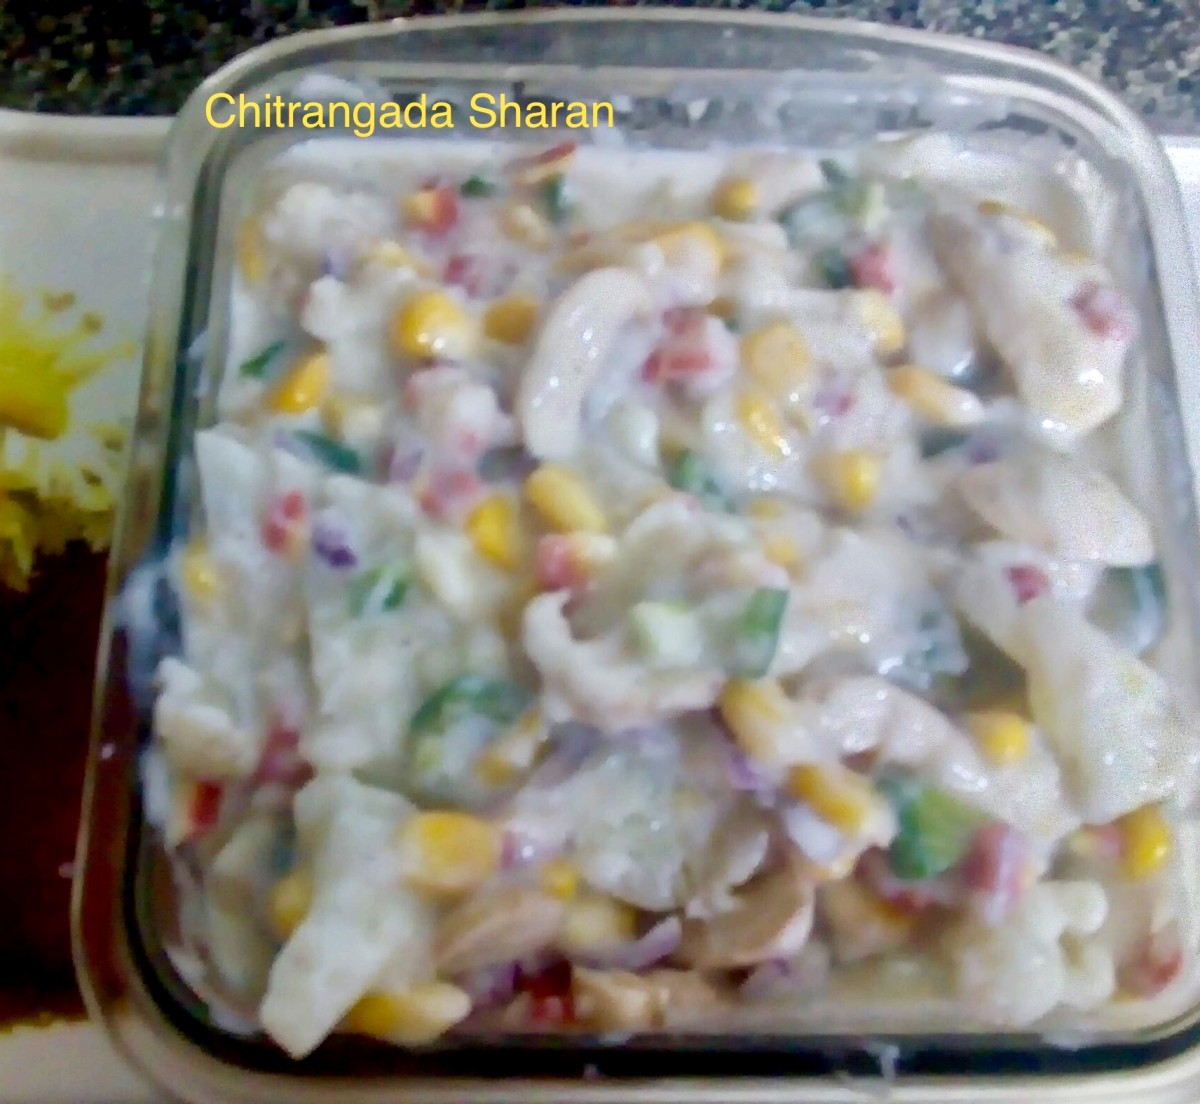 Vegetables mixed with White sauce